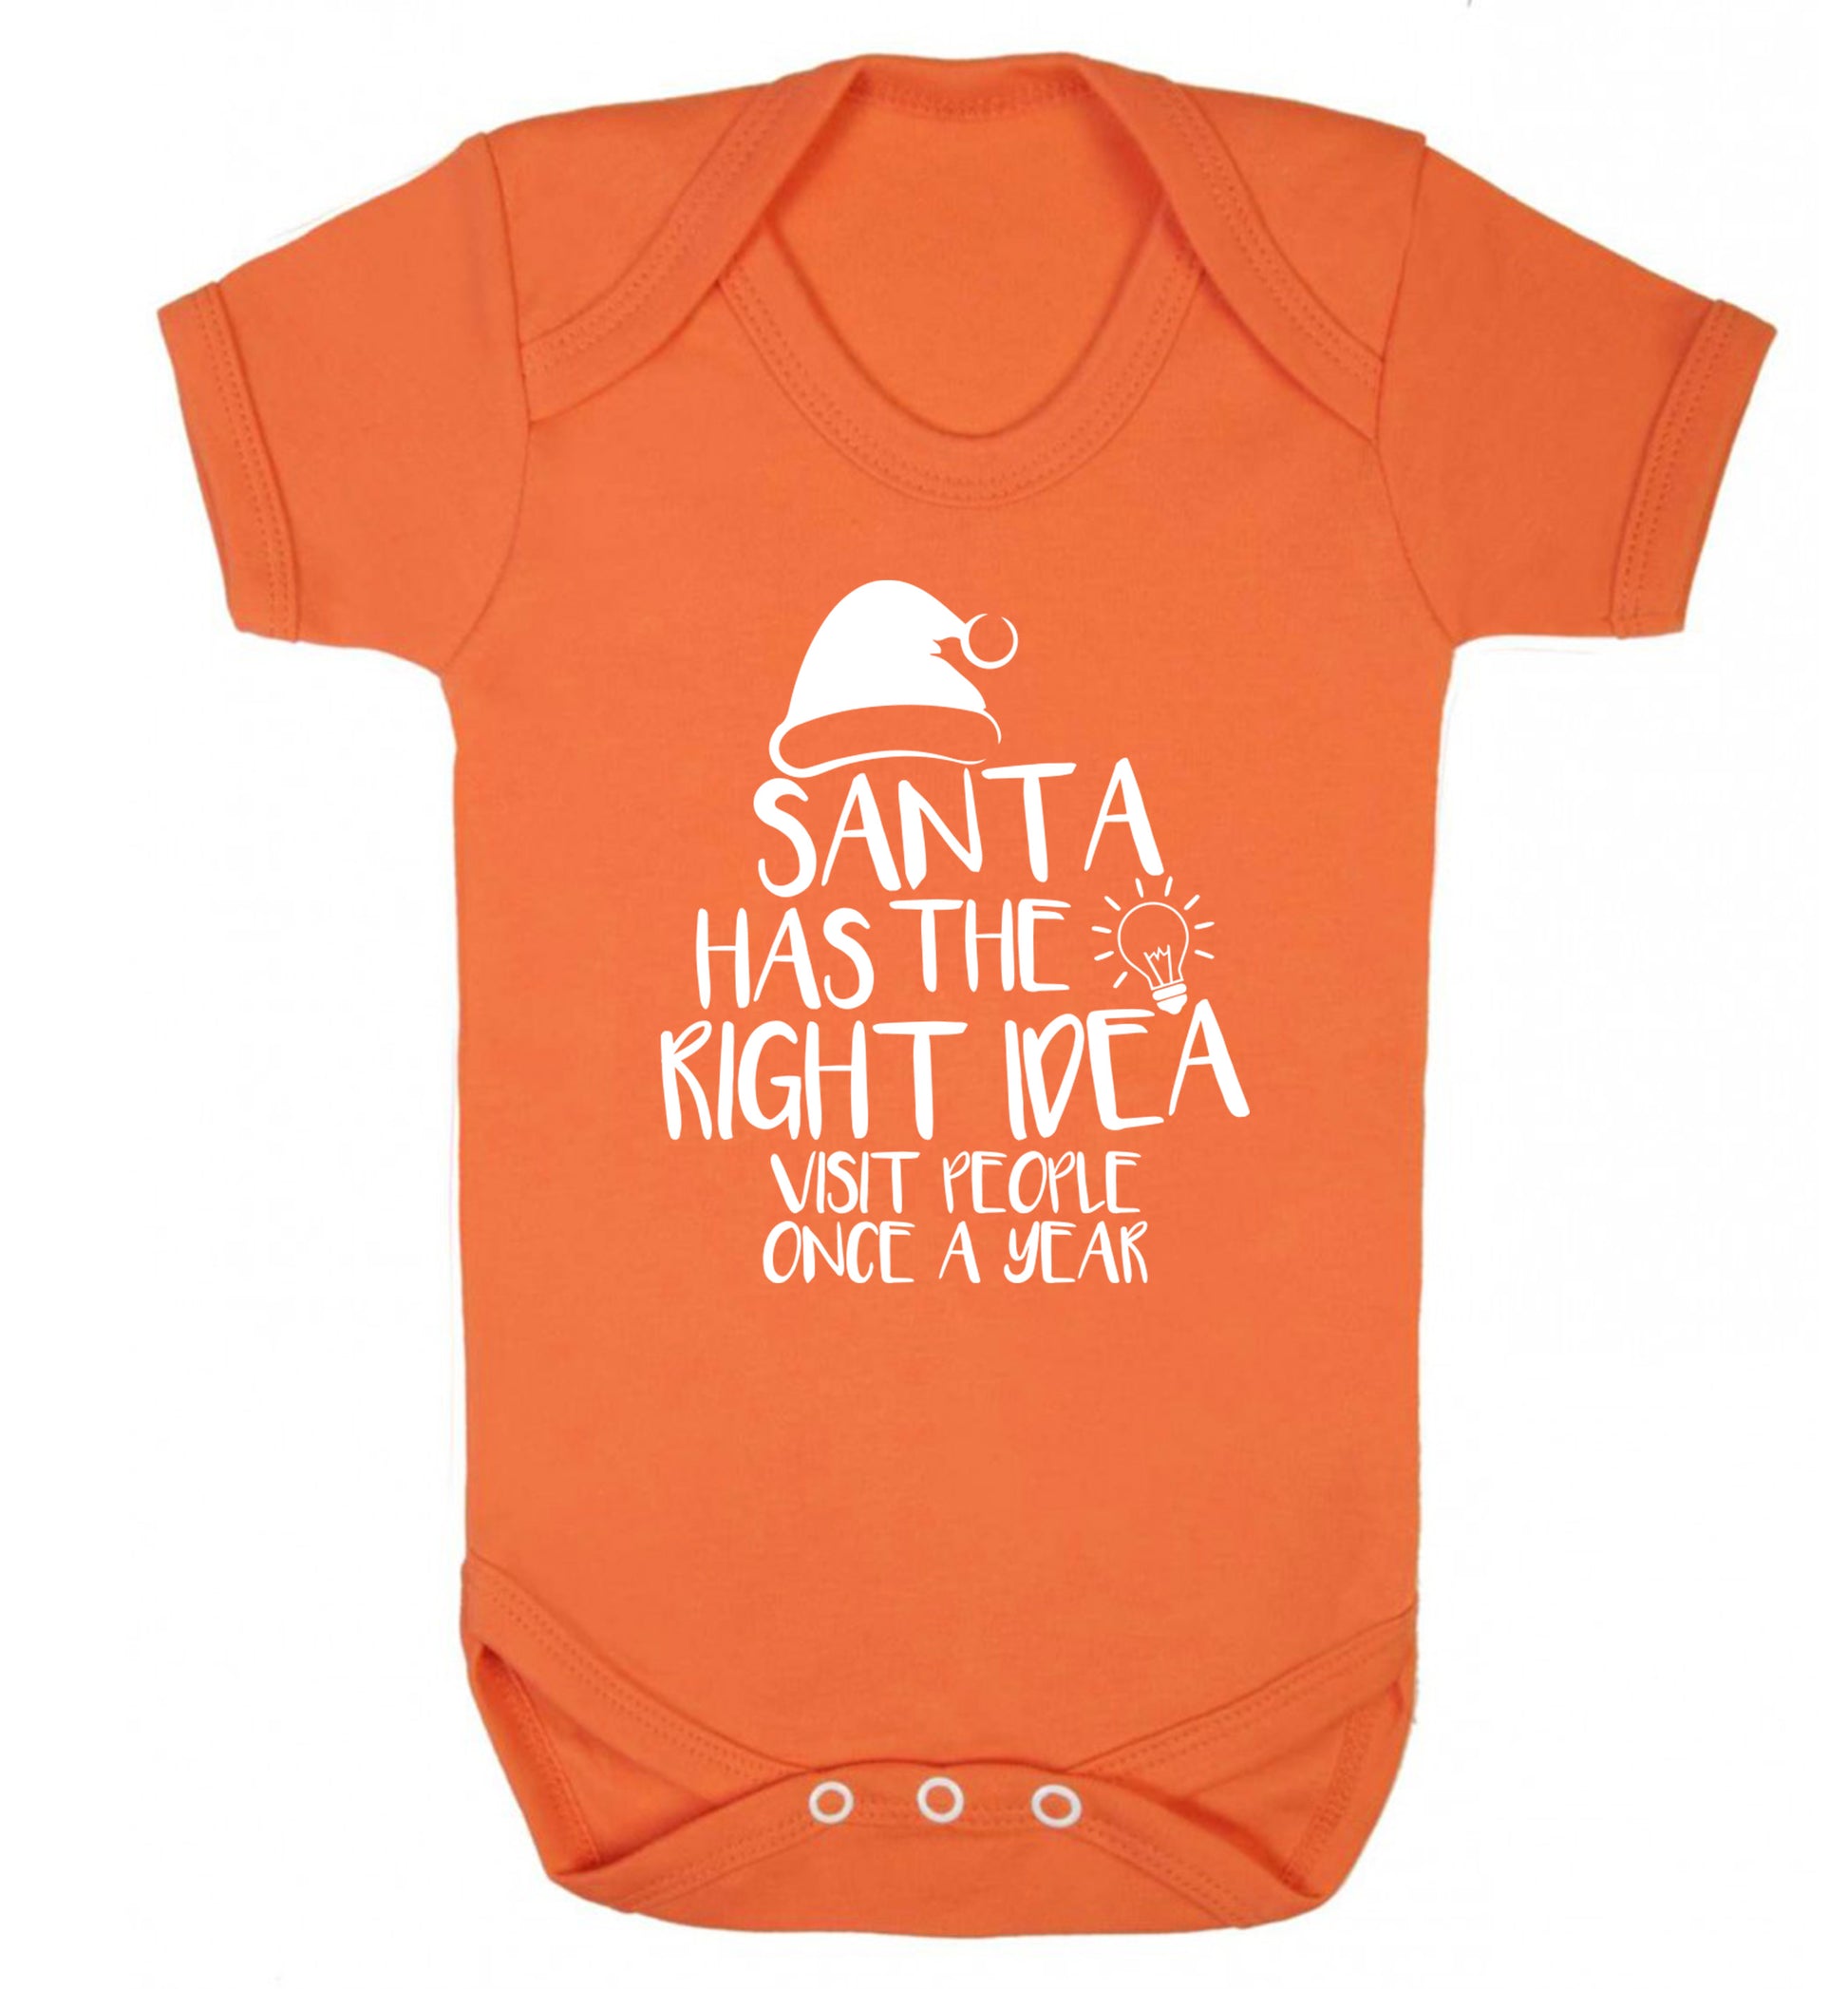 Santa has the right idea visit people once a year Baby Vest orange 18-24 months